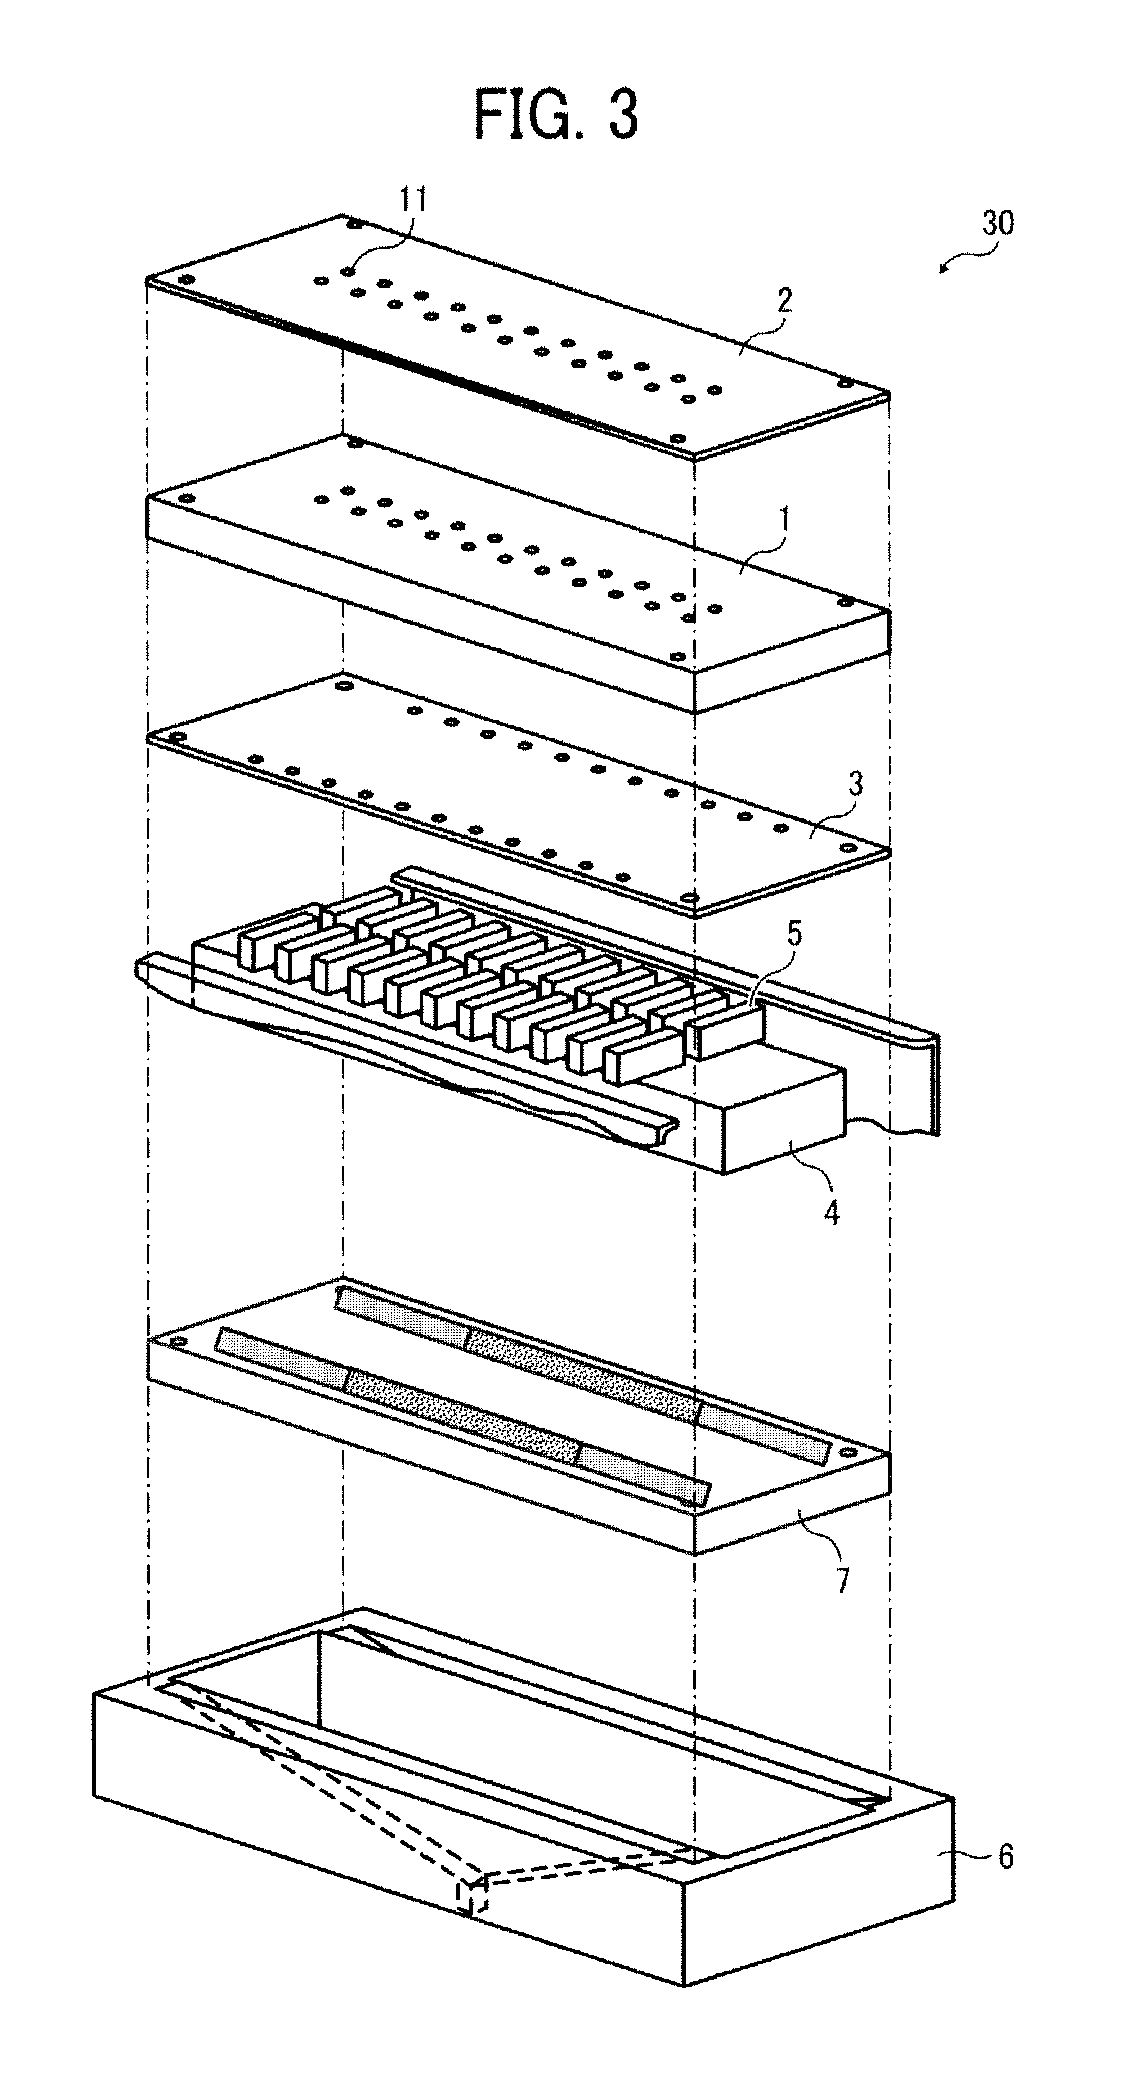 Liquid droplet ejection head, image forming apparatus including same, and method for cleaning same